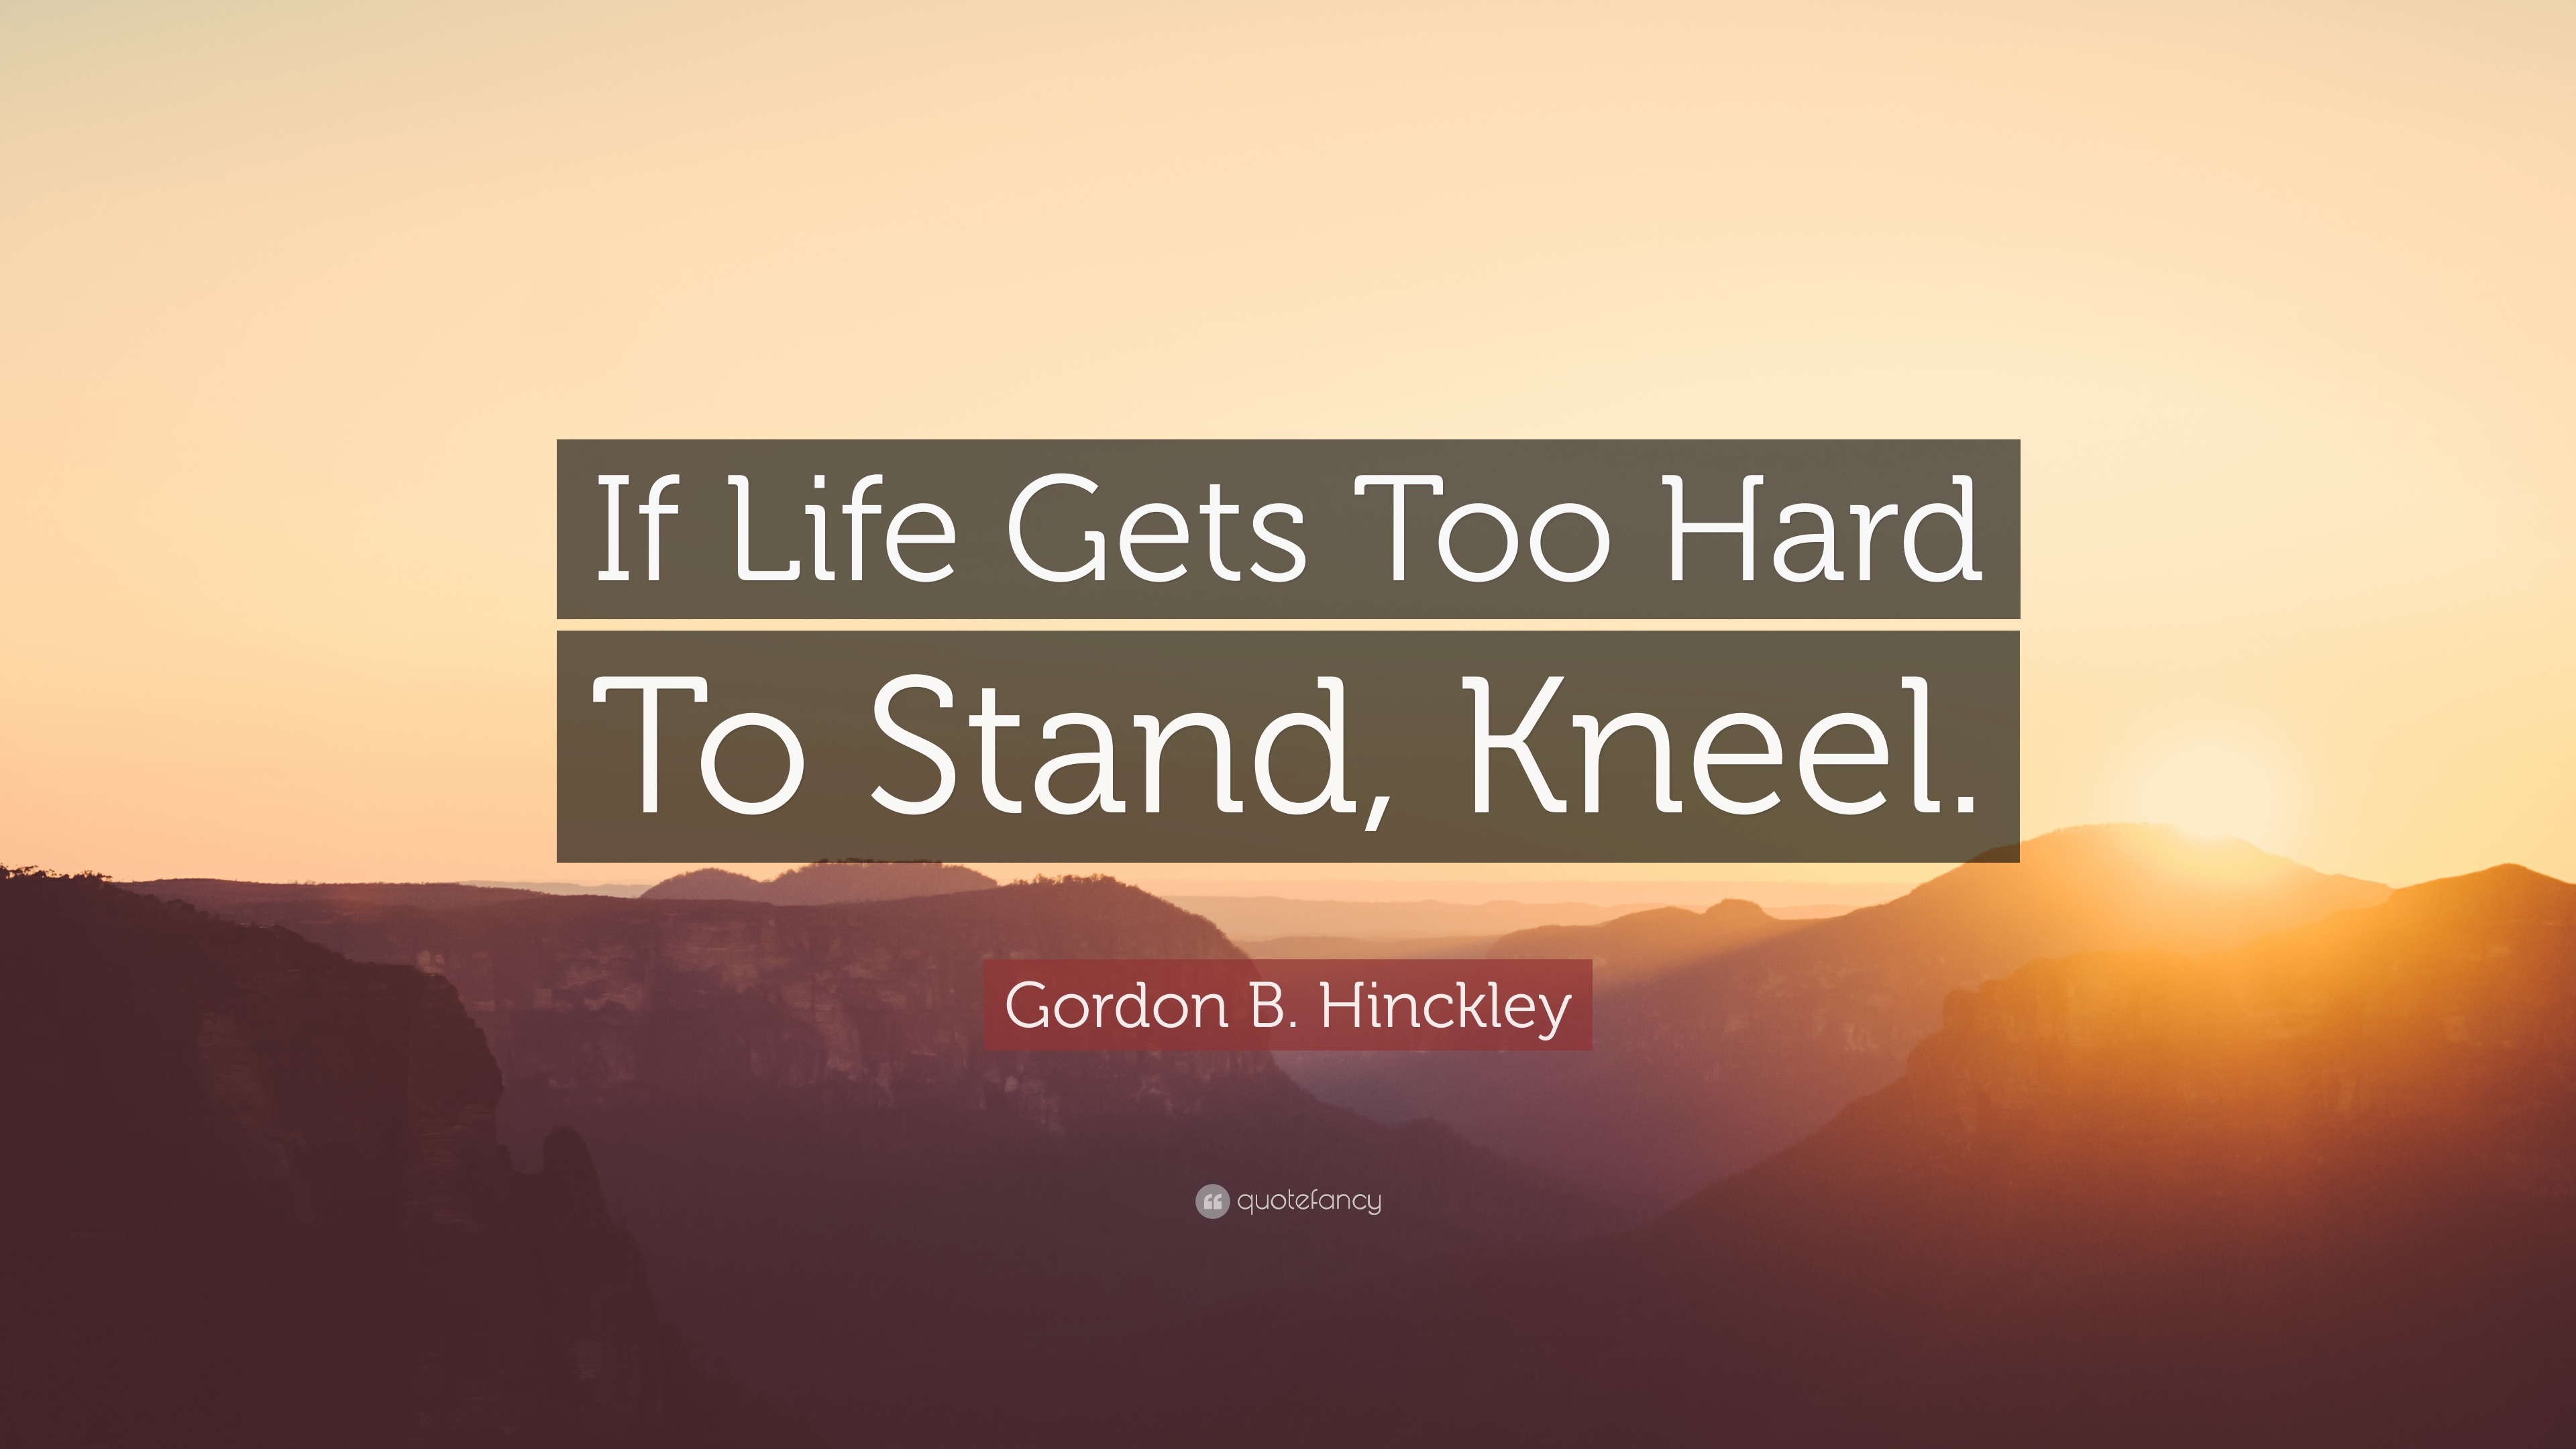 Gordon B Hinckley Quote “If Life Gets Too Hard To Stand Kneel